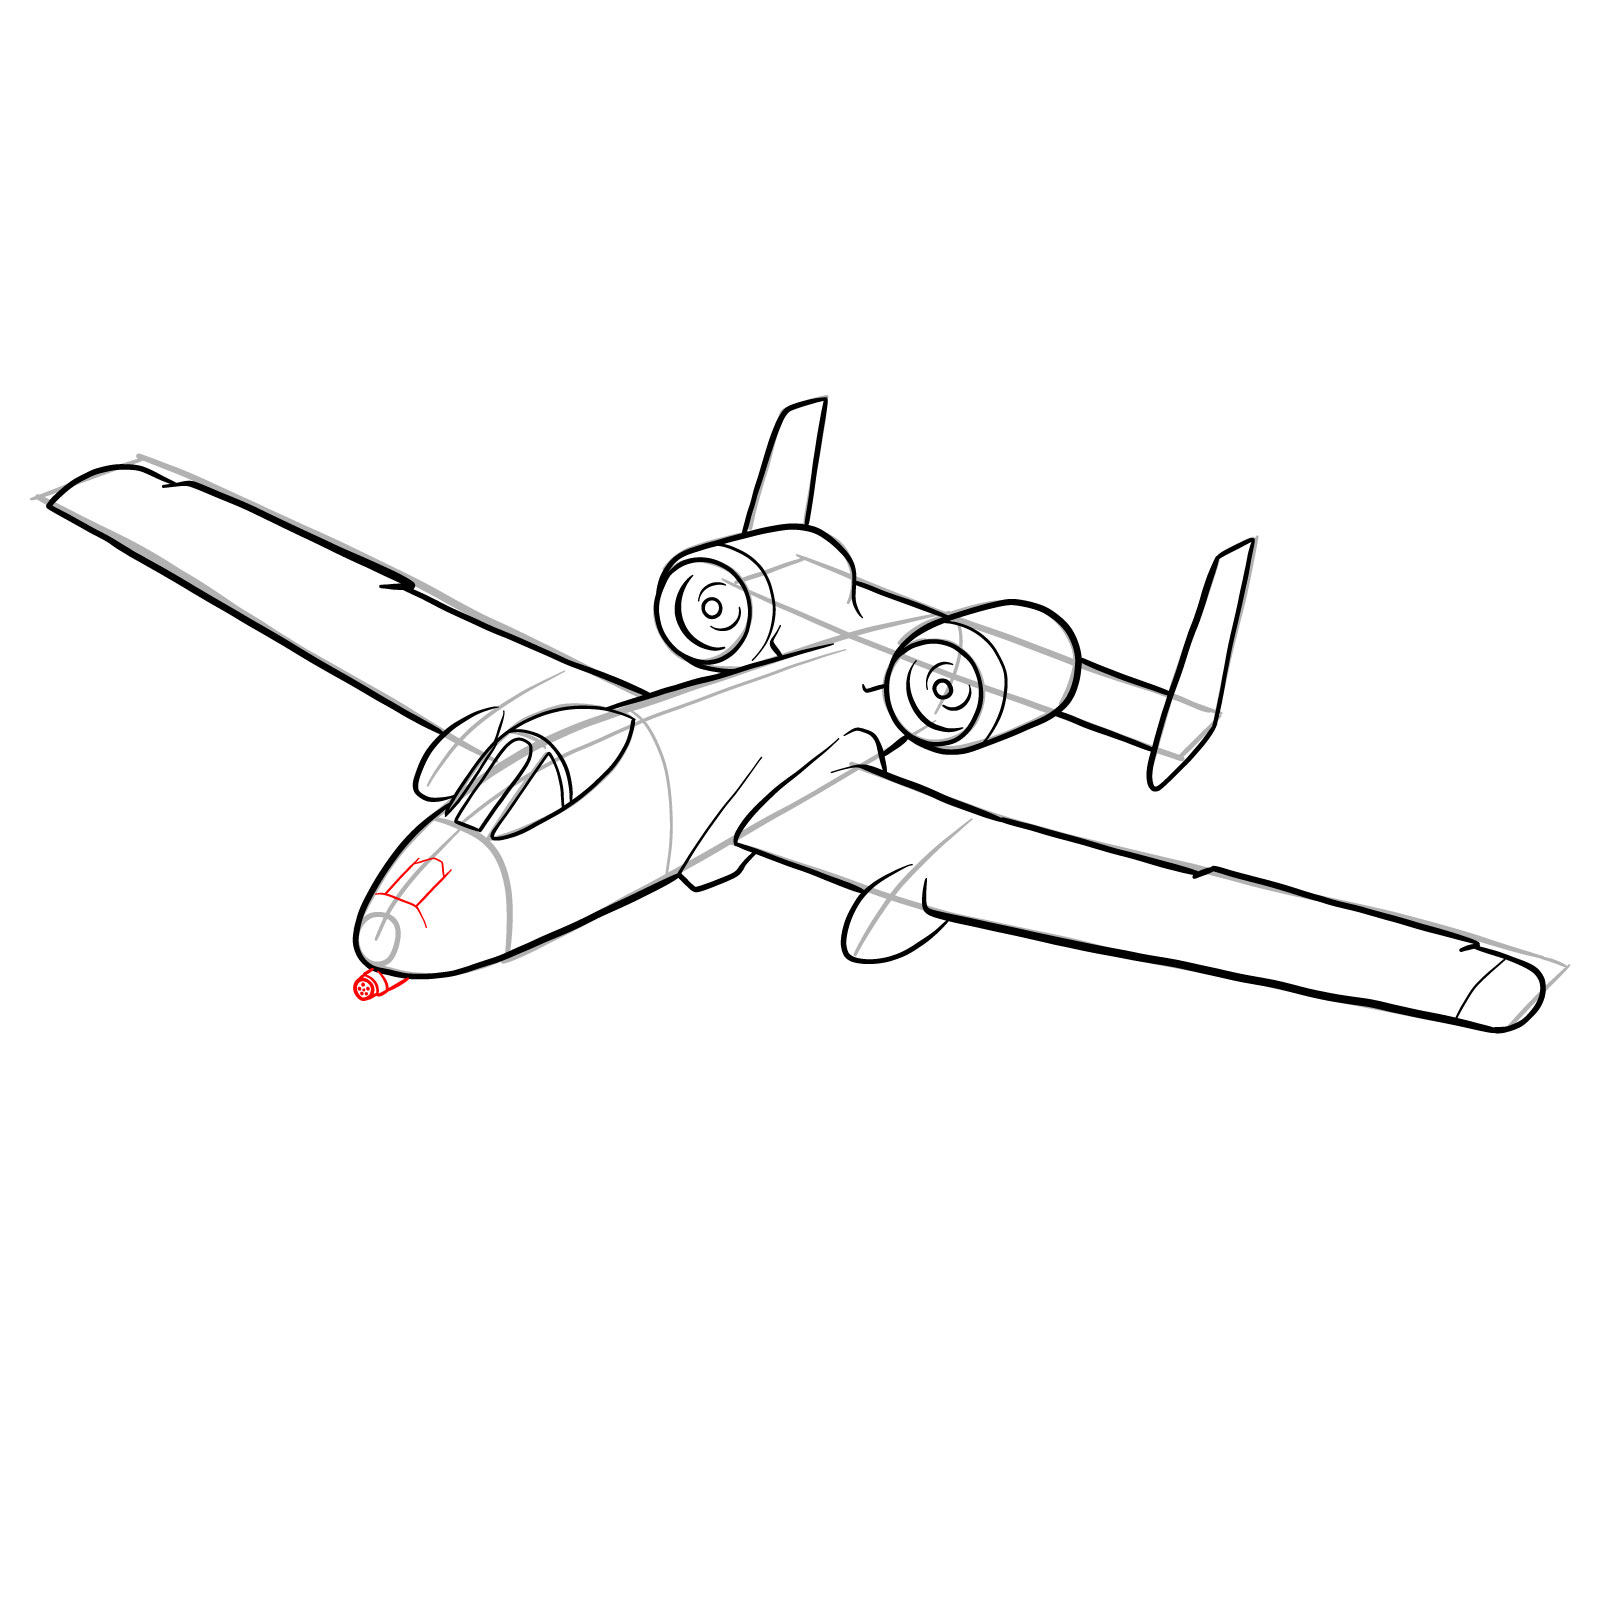 How to draw A-10 Thunderbolt II - step 25